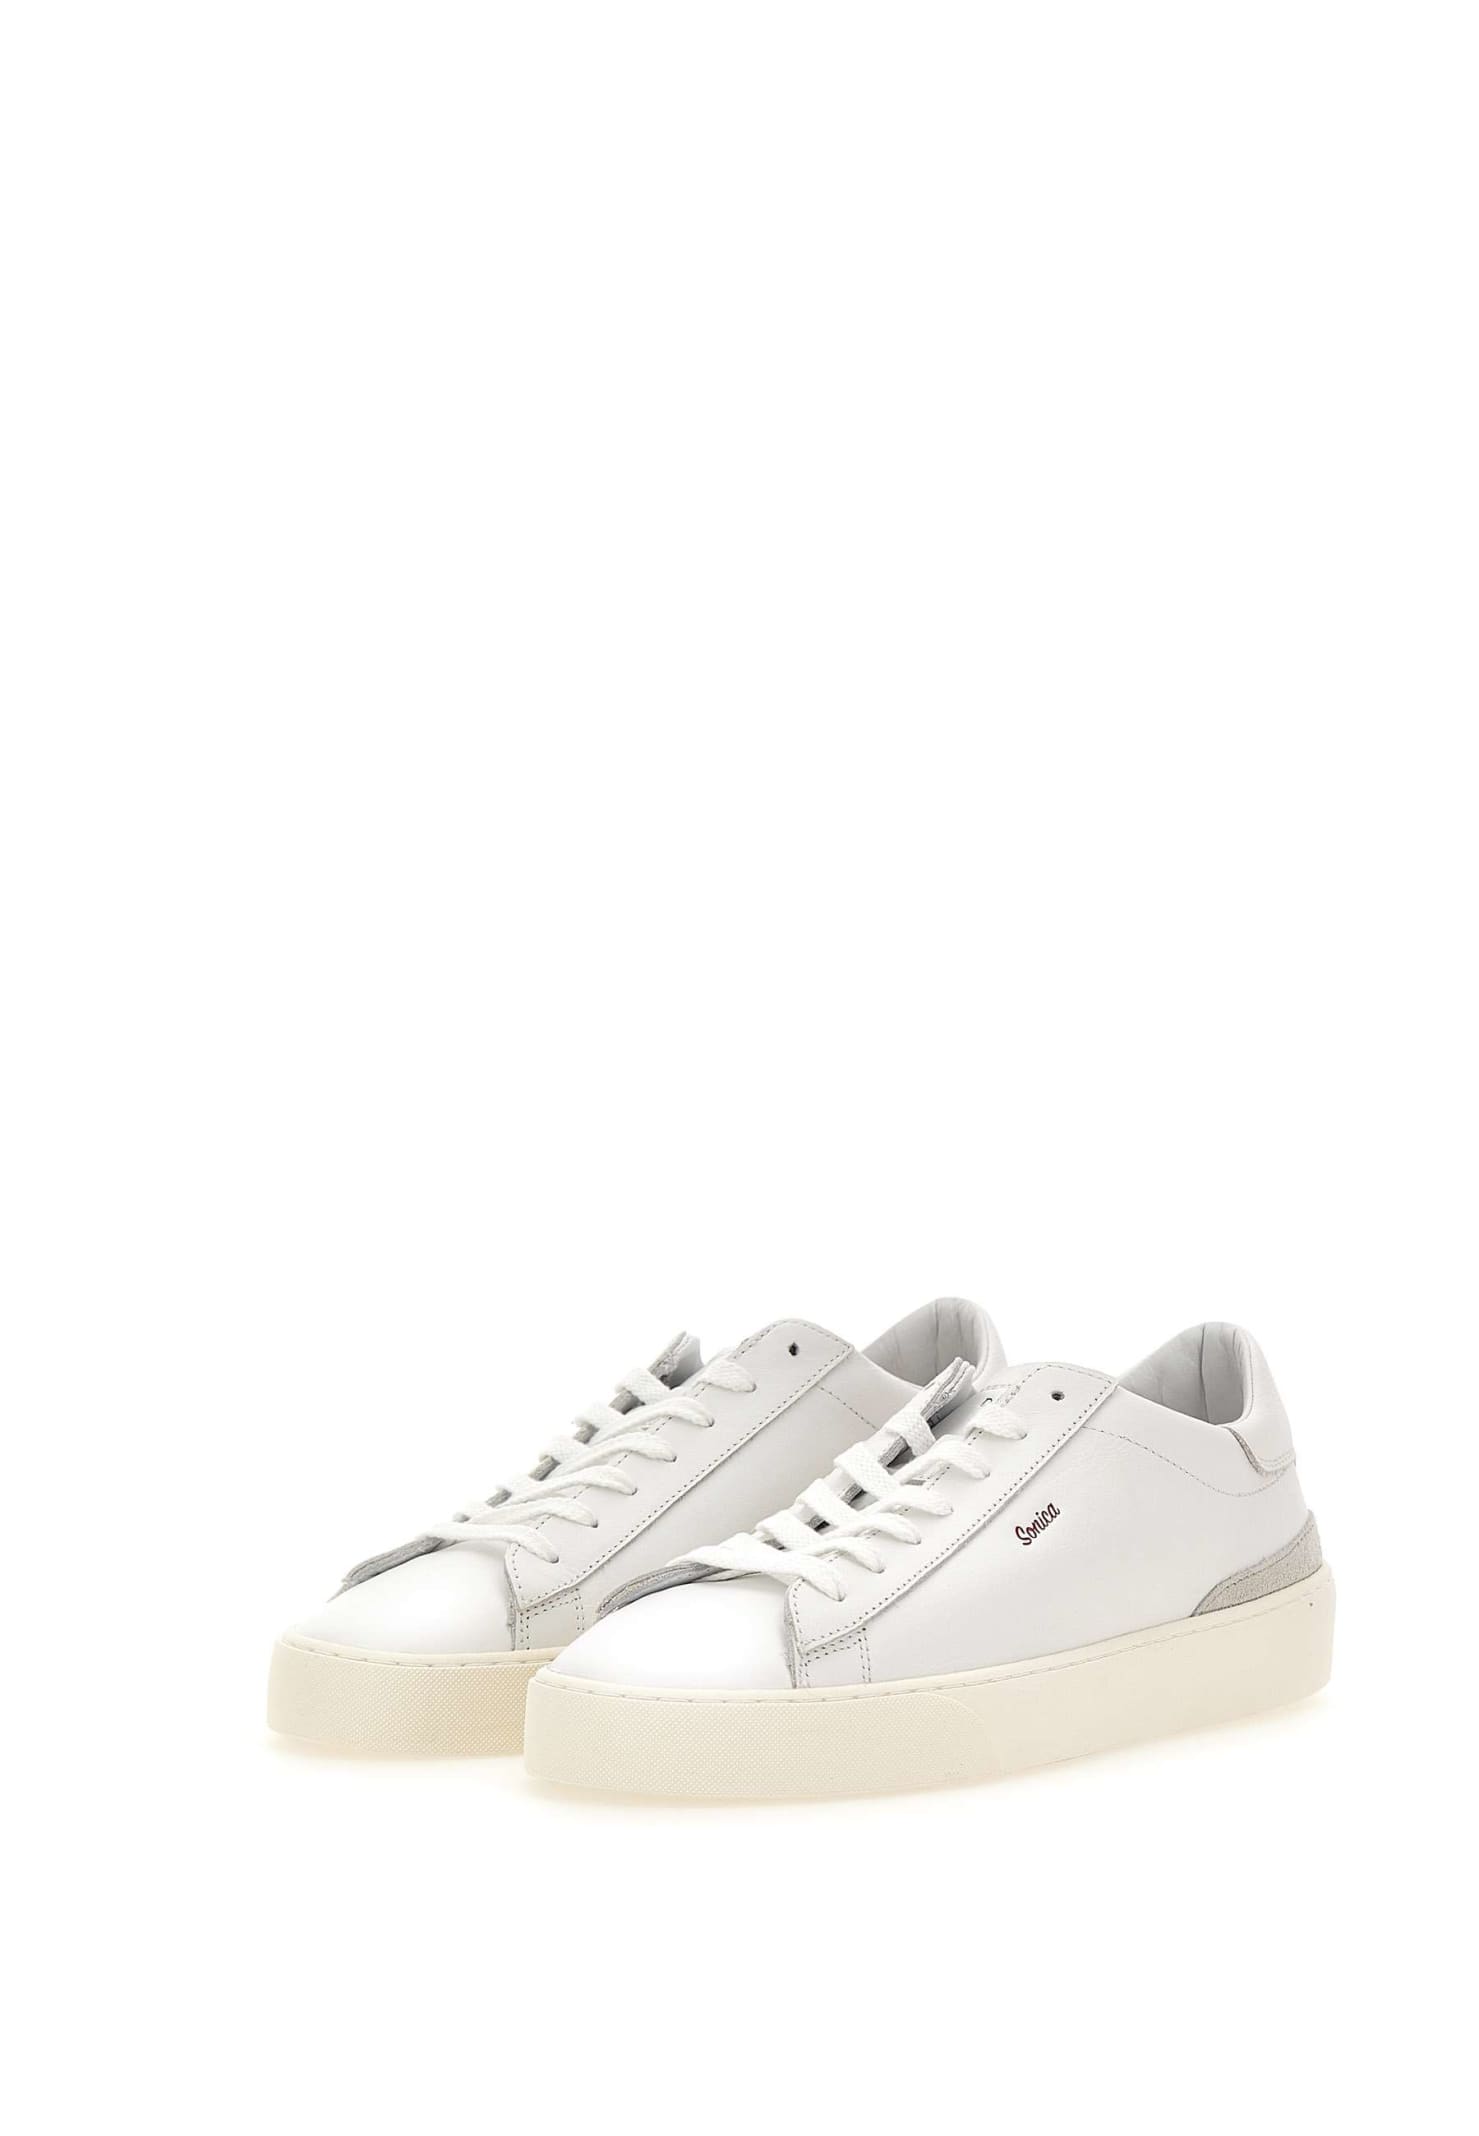 Shop Date Sonica Calf Leather Sneakers In White